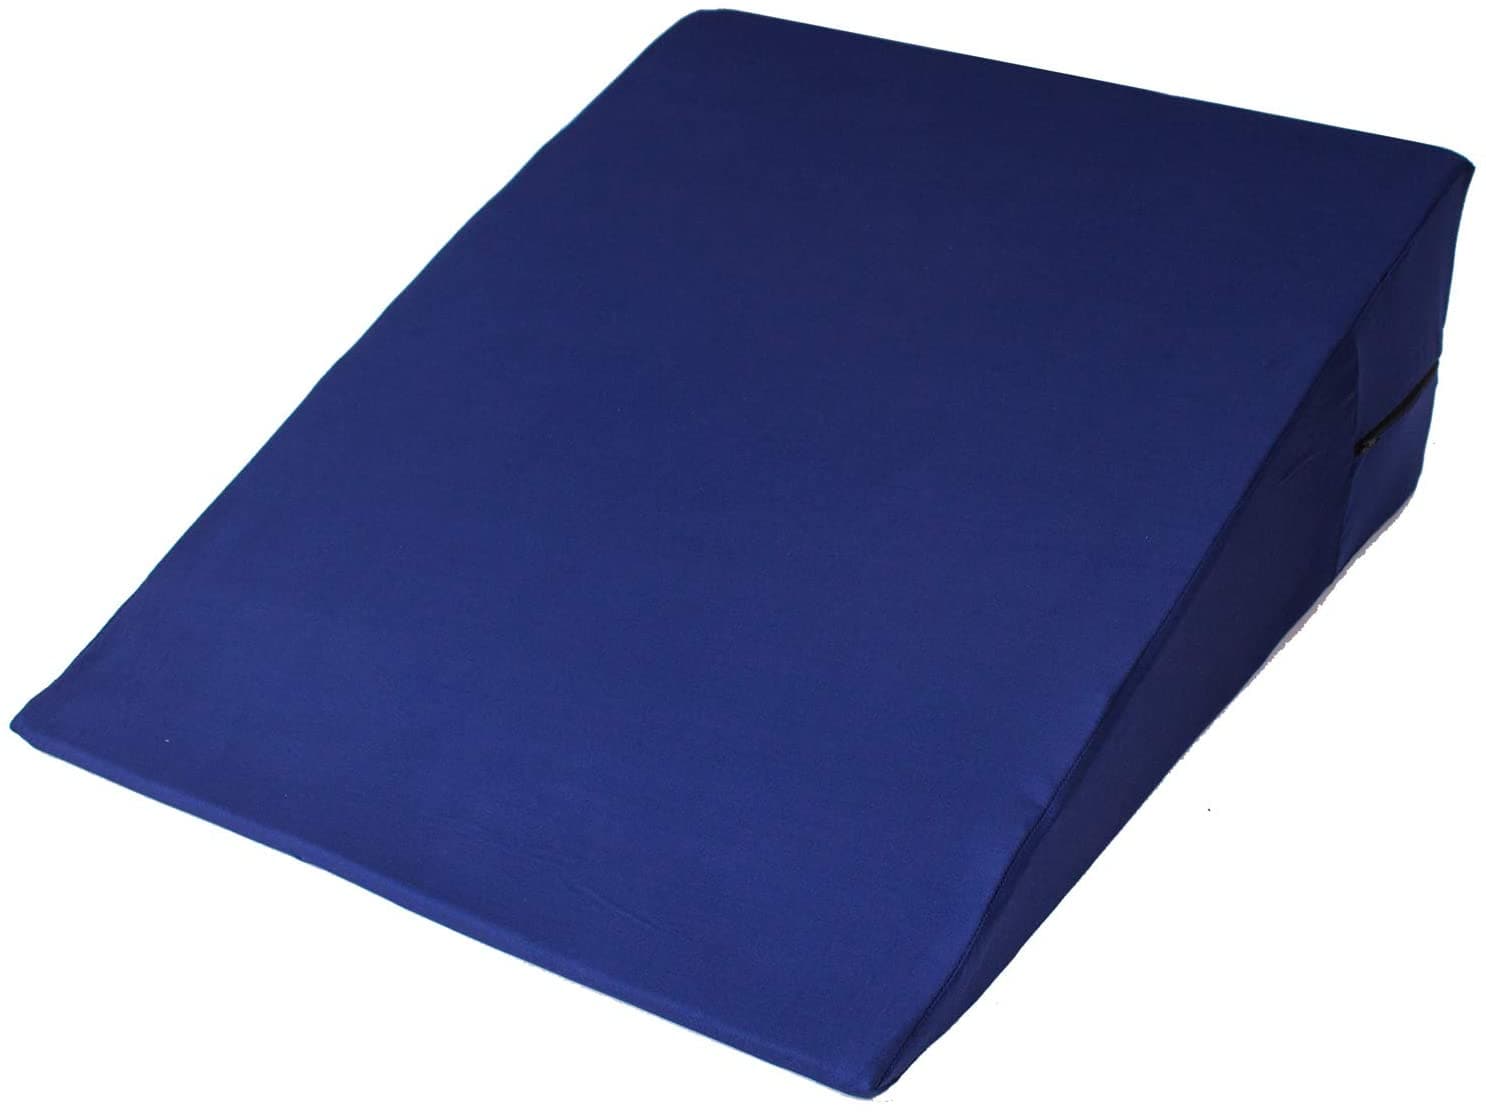 Carex Wedge Pillow for Sleeping - Bed Wedge Pillow for Sleeping at an Incline - Leg Elevation Pillow - Senior.com Bed Wedges